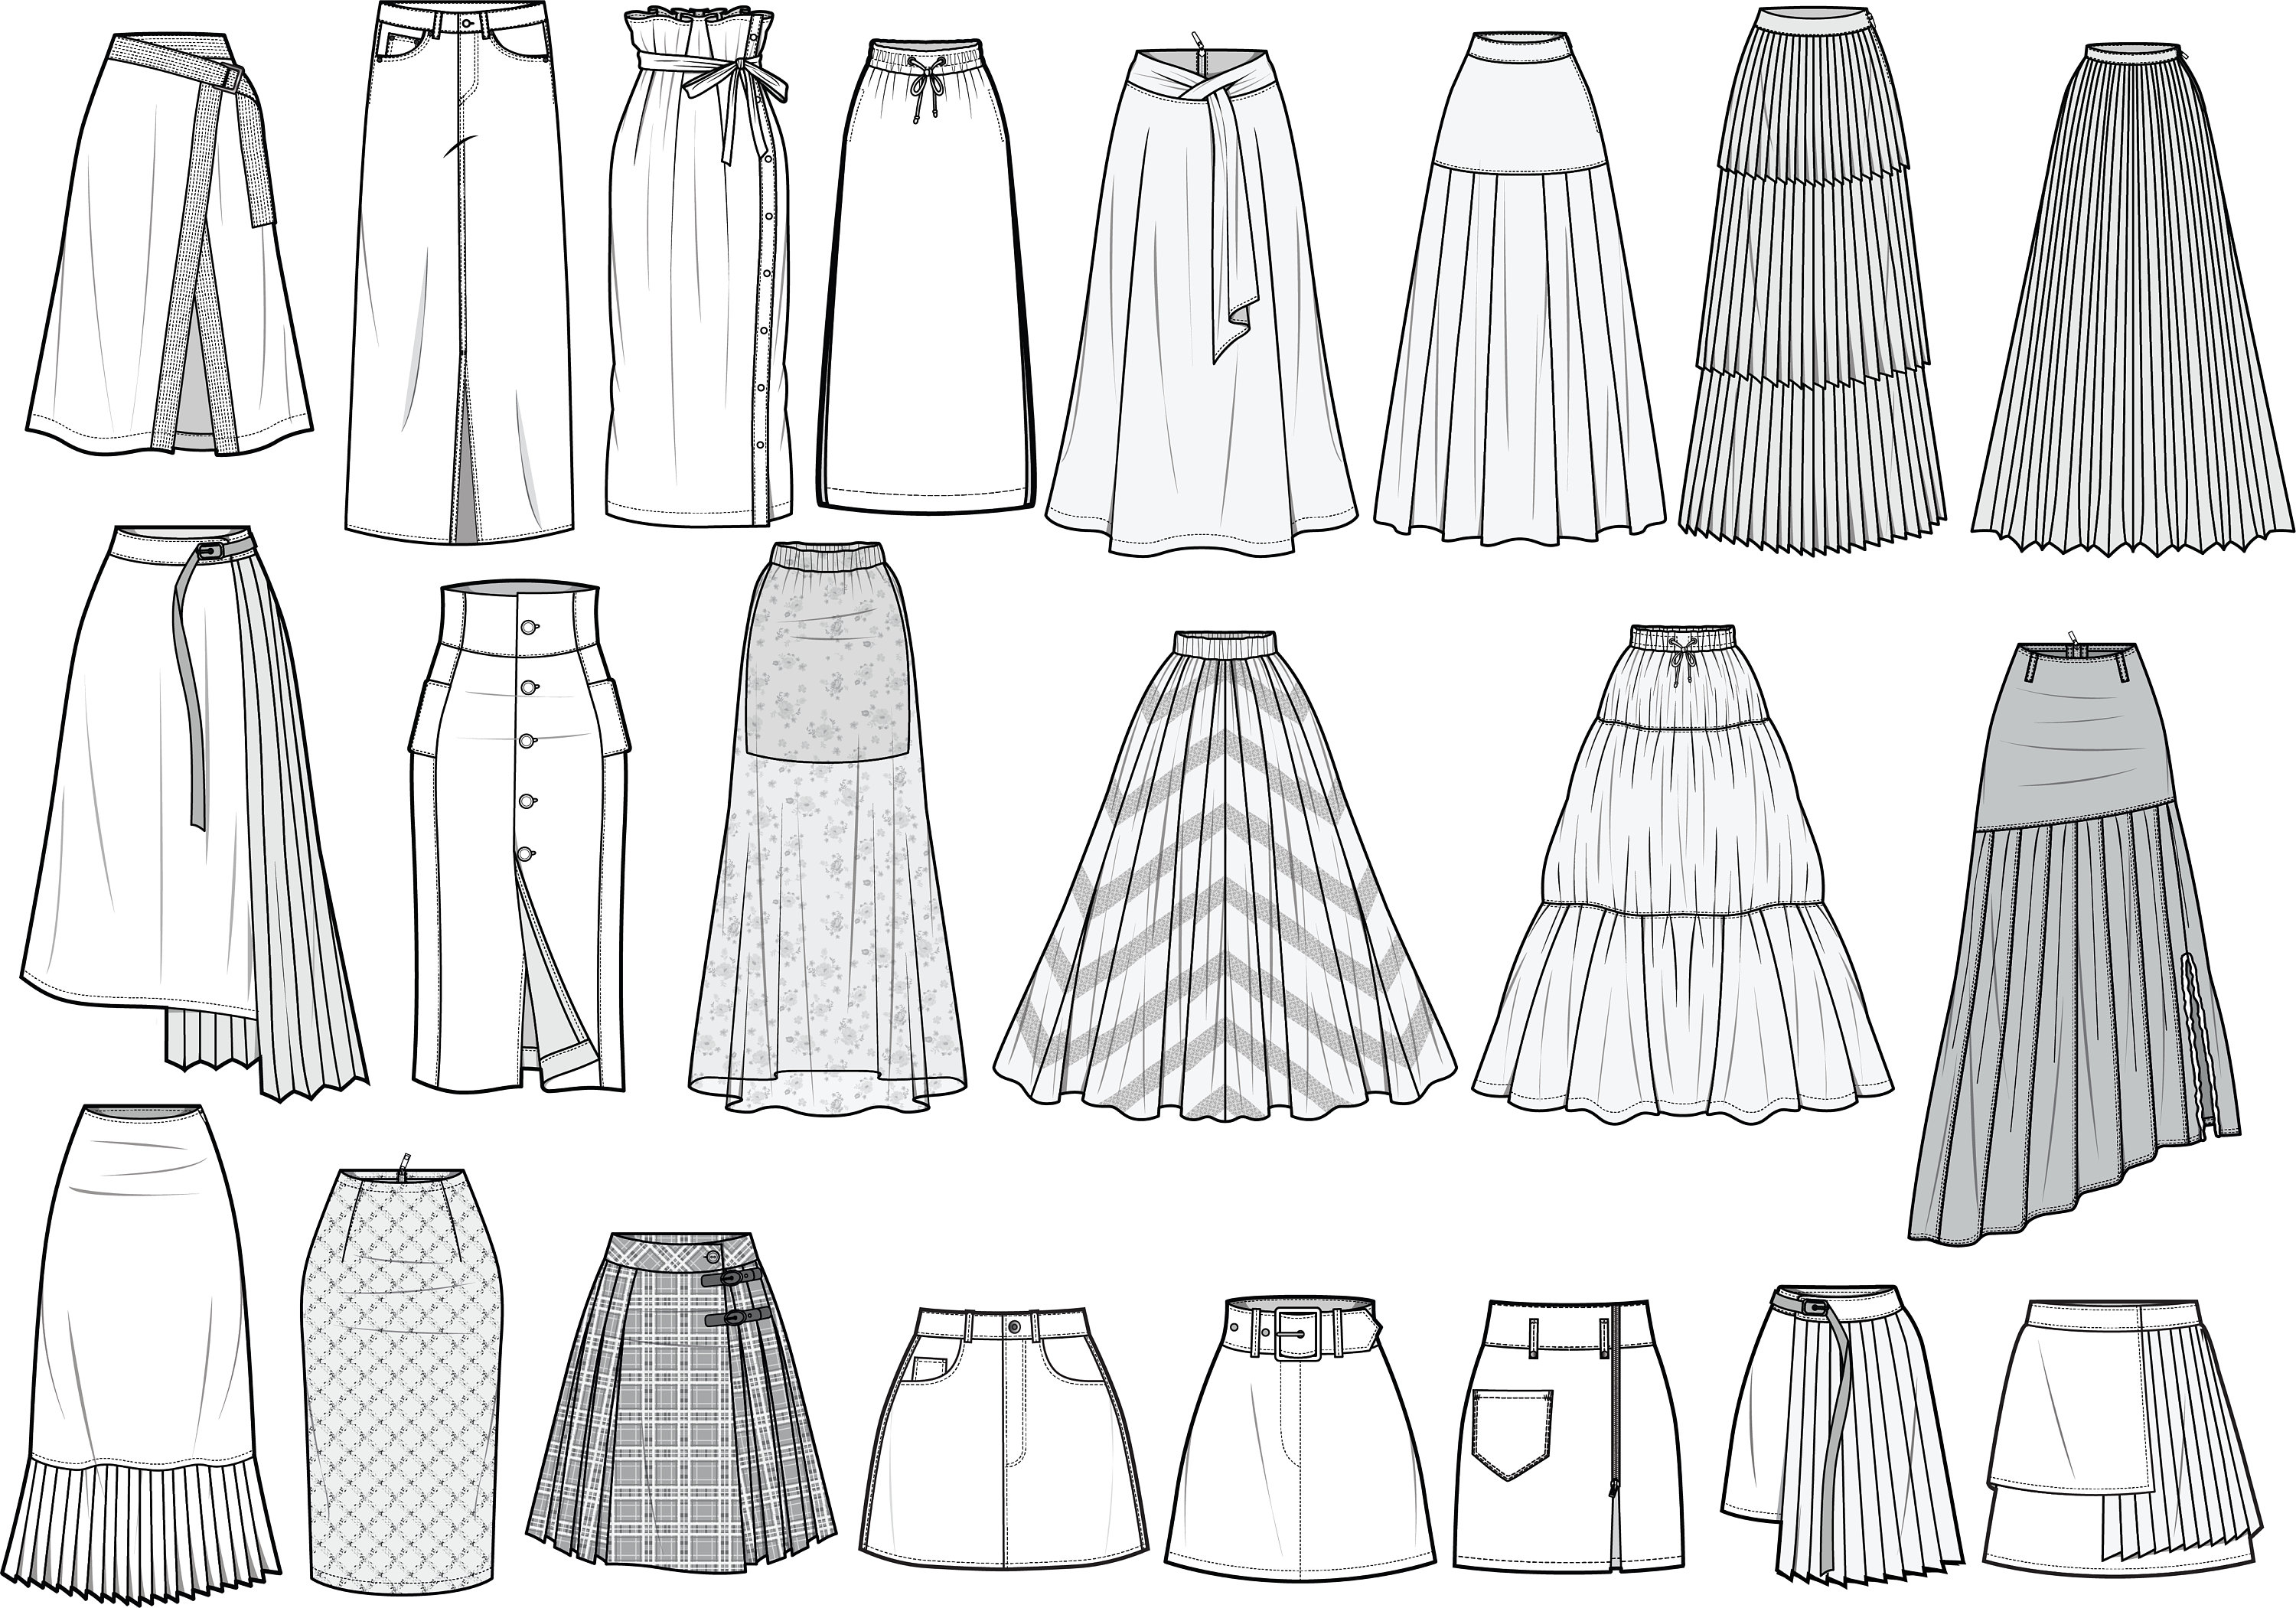 Skirt Illustrations and Clip Art 44234 Skirt royalty free illustrations  drawings and graphics available to search from thousands of vector EPS  clipart producers